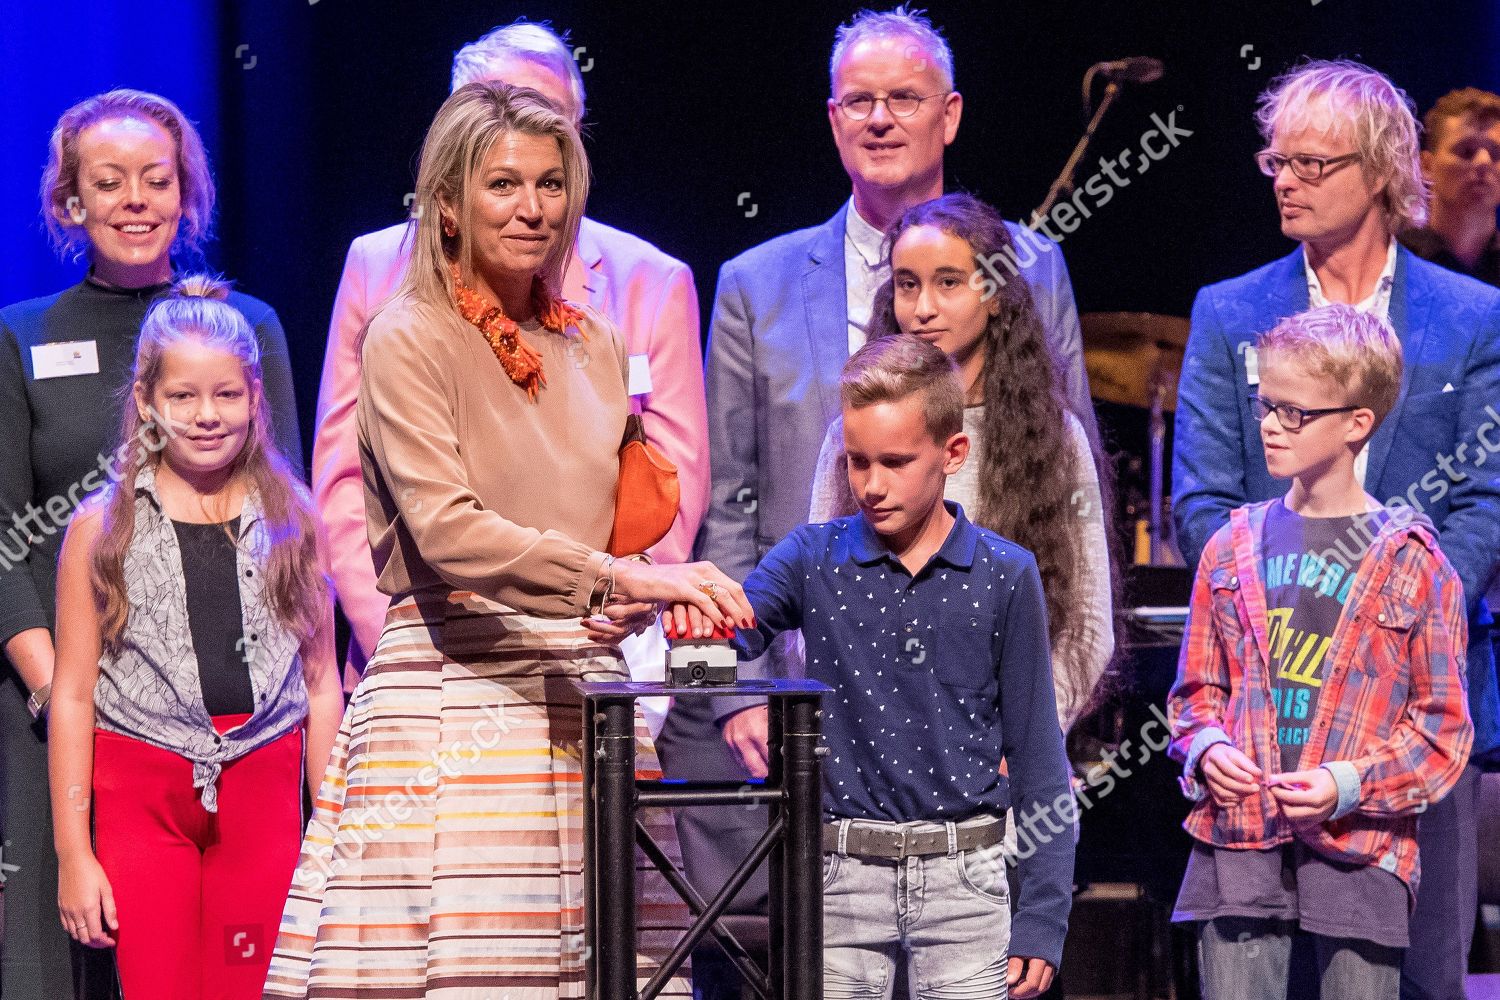 signing-of-the-cooperation-agreement-for-music-education-drachten-the-netherlands-shutterstock-editorial-9887703i.jpg